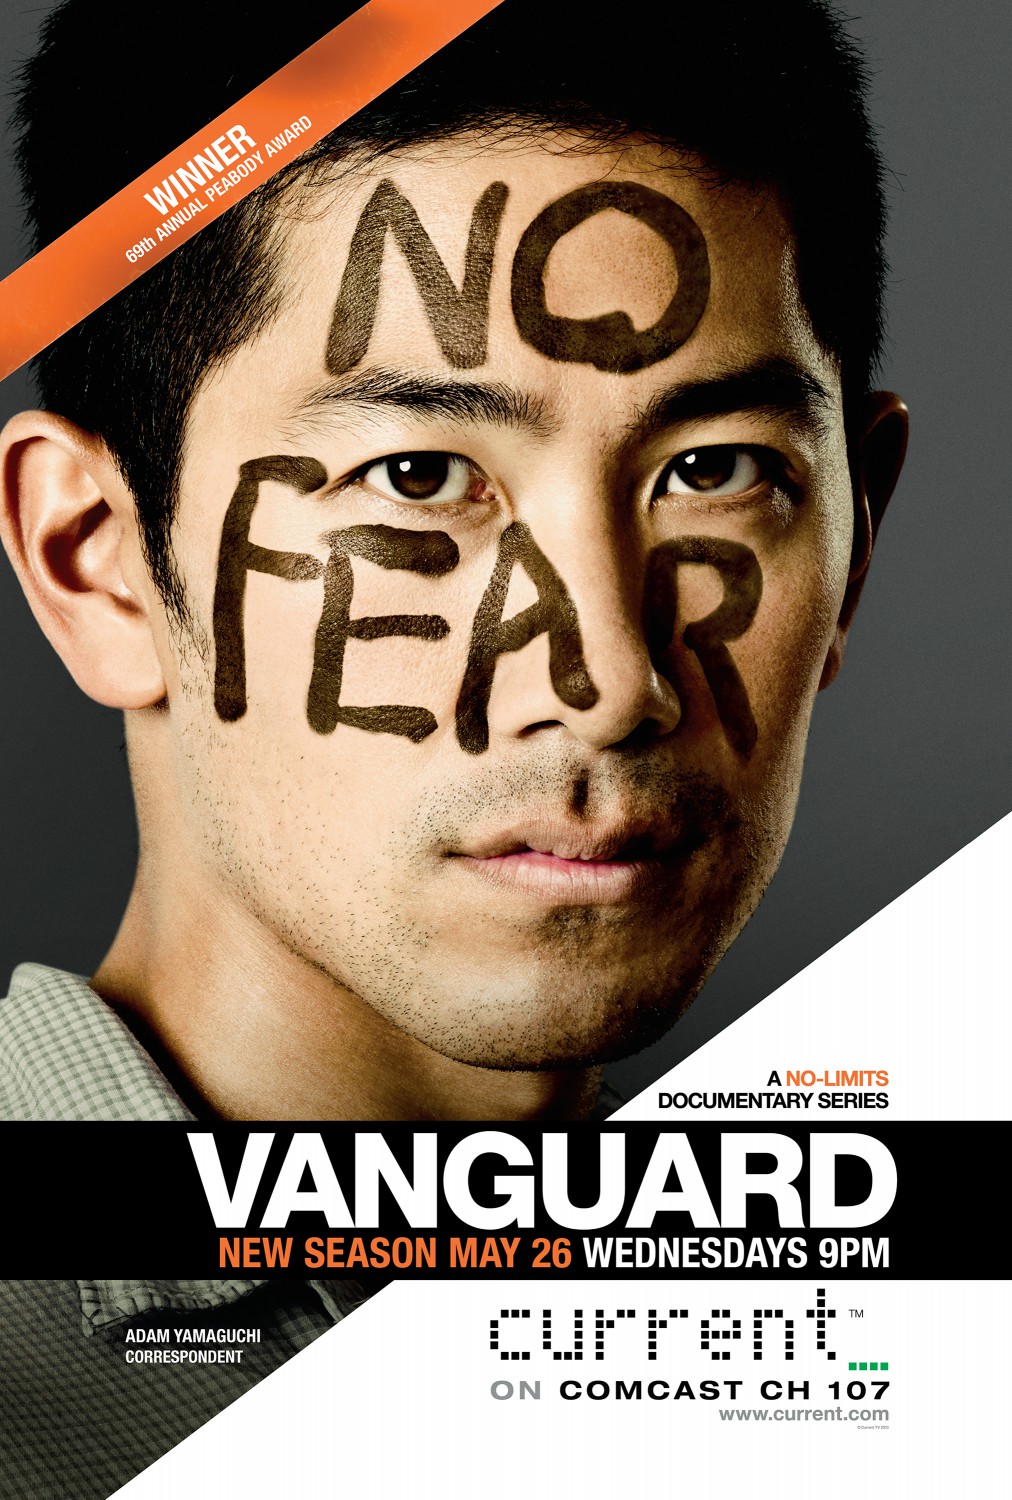 Extra Large TV Poster Image for Vanguard 